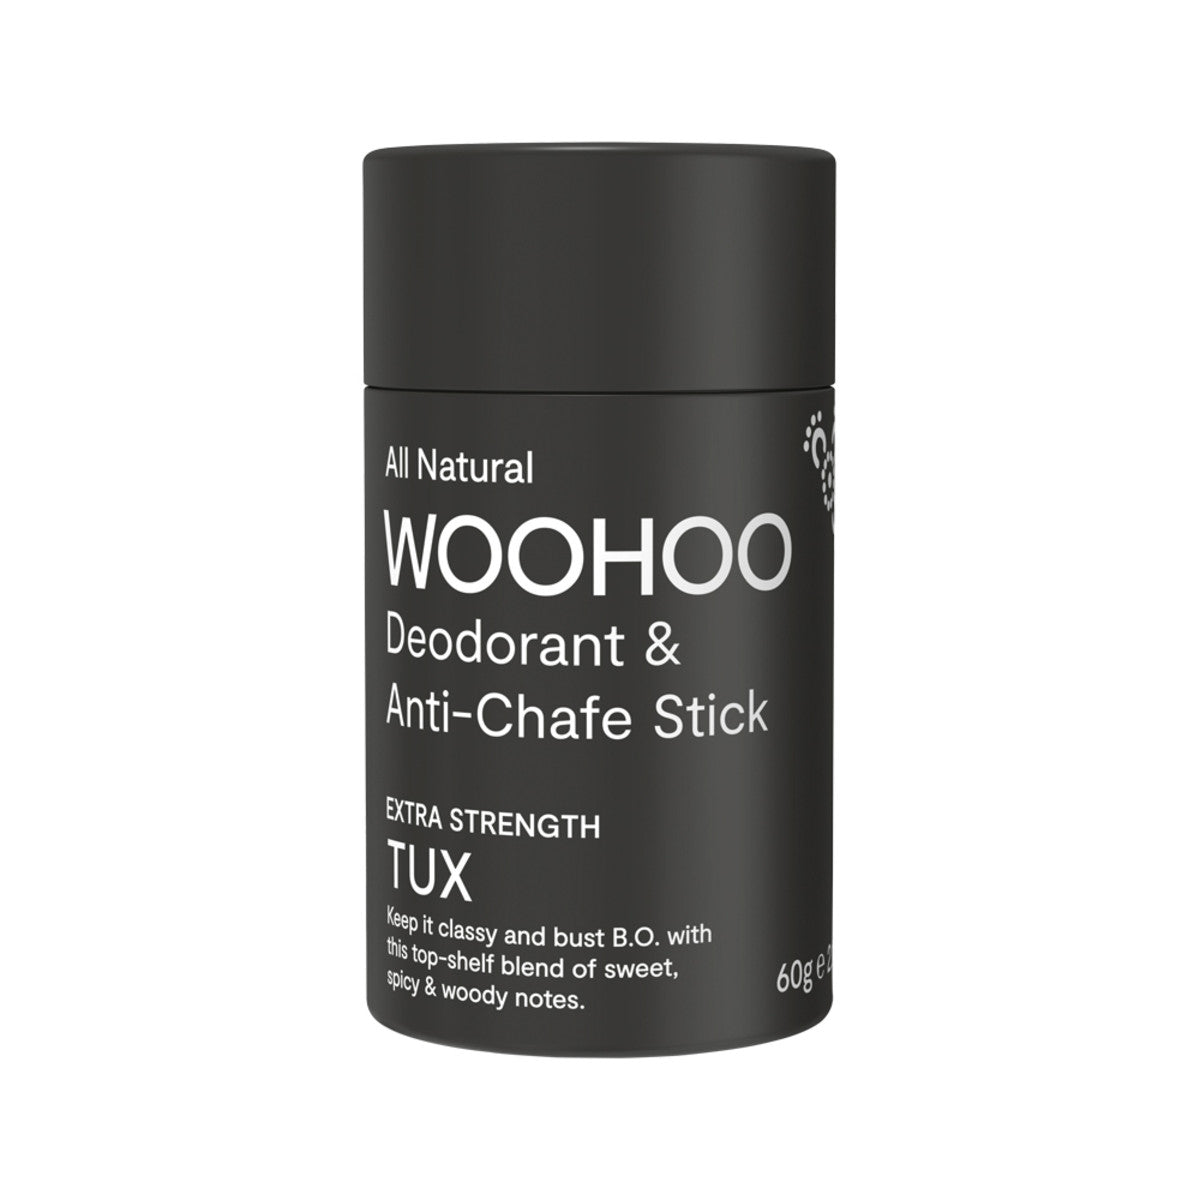 Woohoo Natural Deodorant & Anti-Chafe Stick (Tux) 60g-The Living Co.